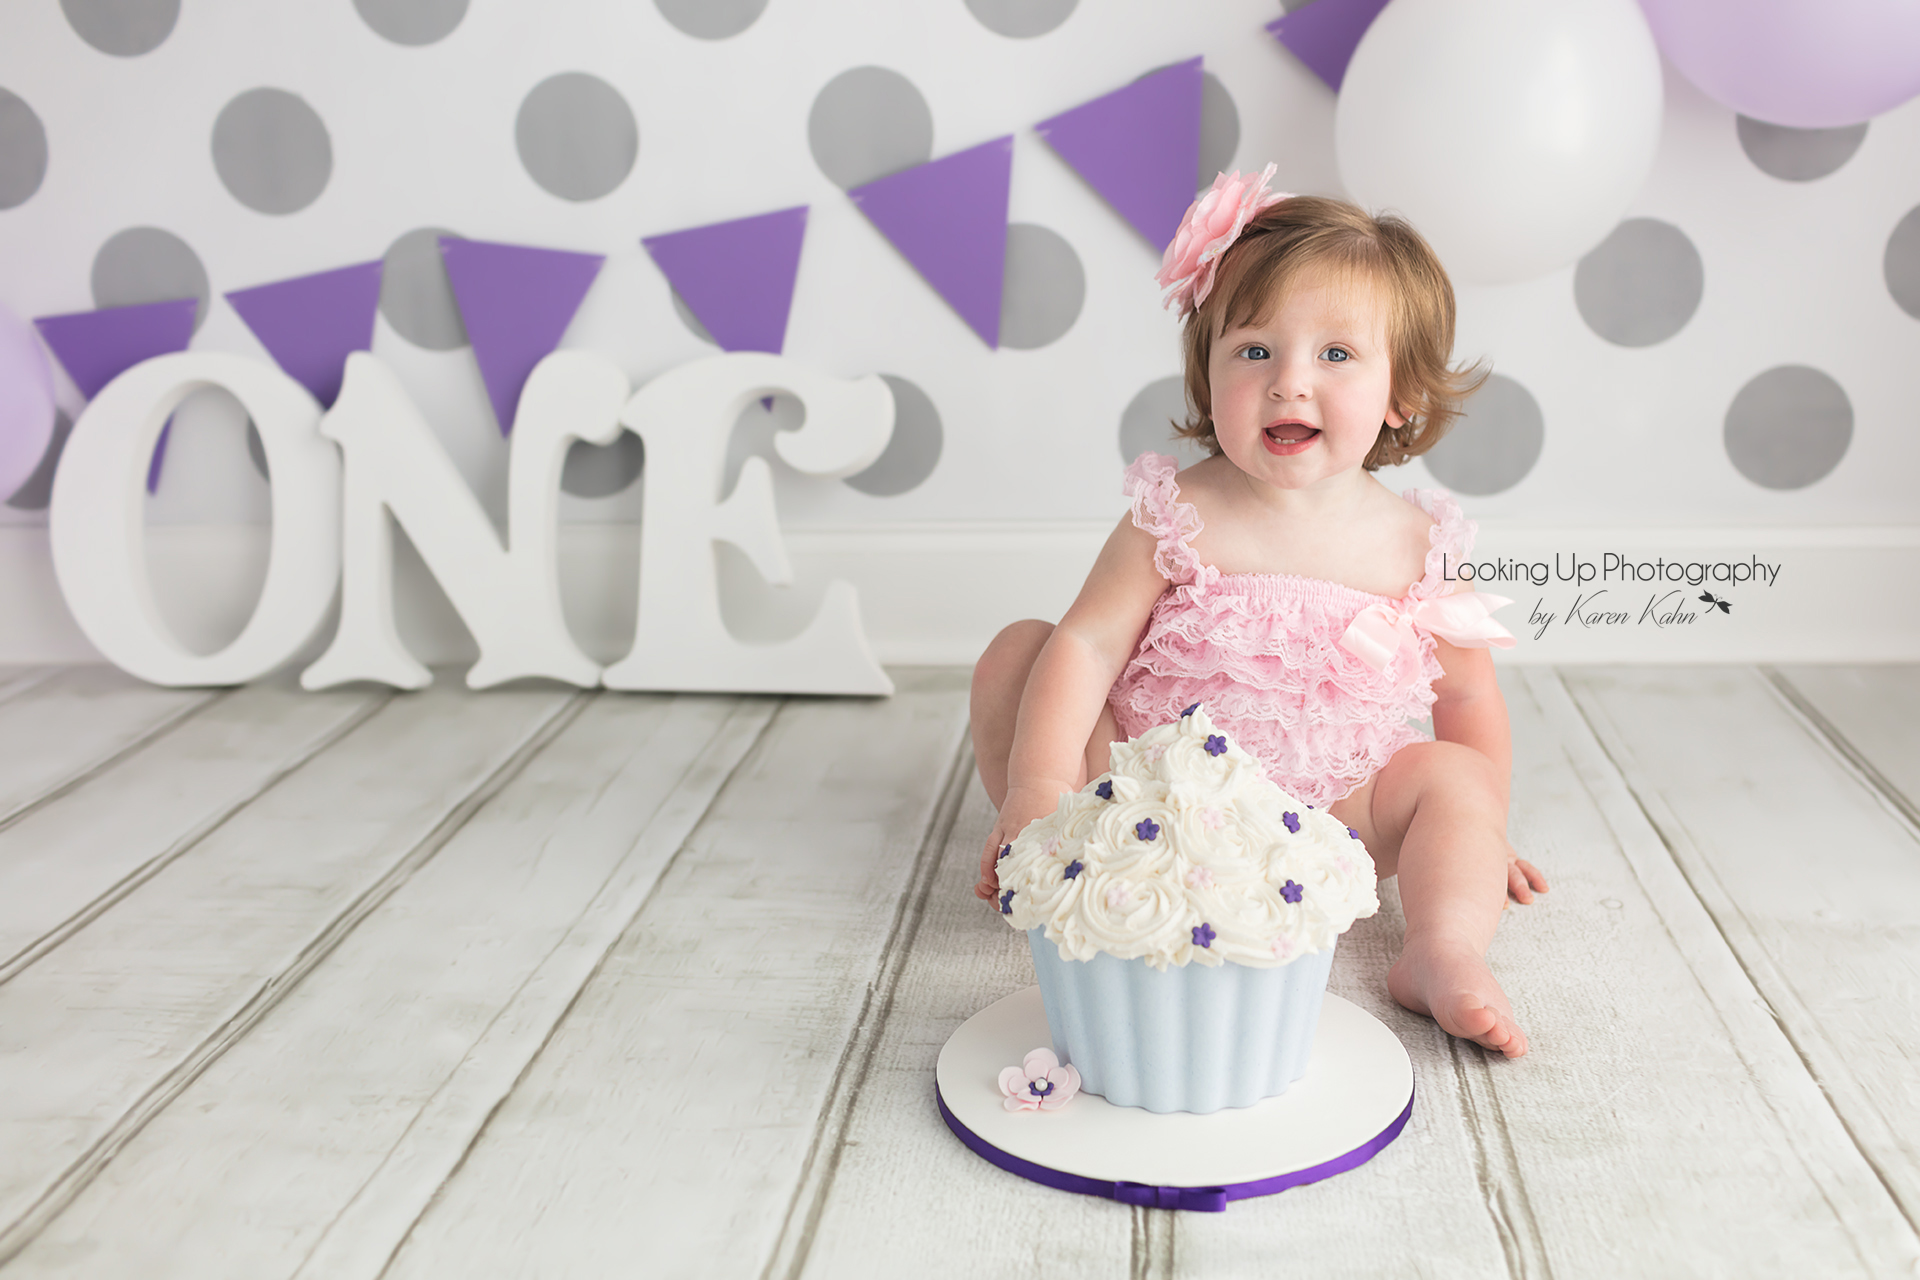 Pretty in pink 12 month milestone for baby girl looking sweet in lace and flower hair bow with gray polka dots for cake smash session one year old portrait